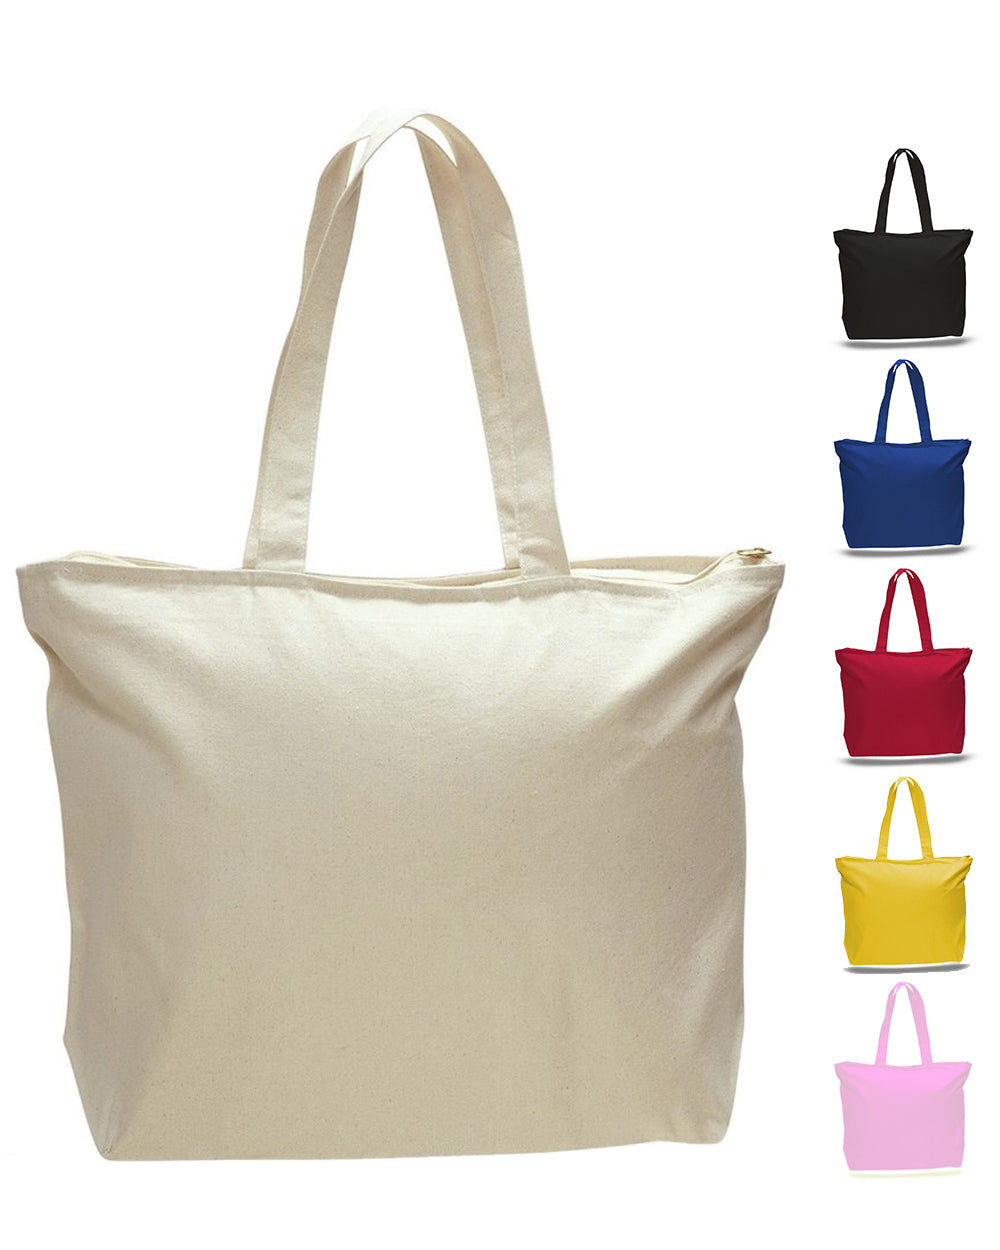 Zip Cloth Bags Canvas tote bags New Large Capacity Shoulder Canvas Bags  Reusable canvas grocery bags Fashion canvas tote bag